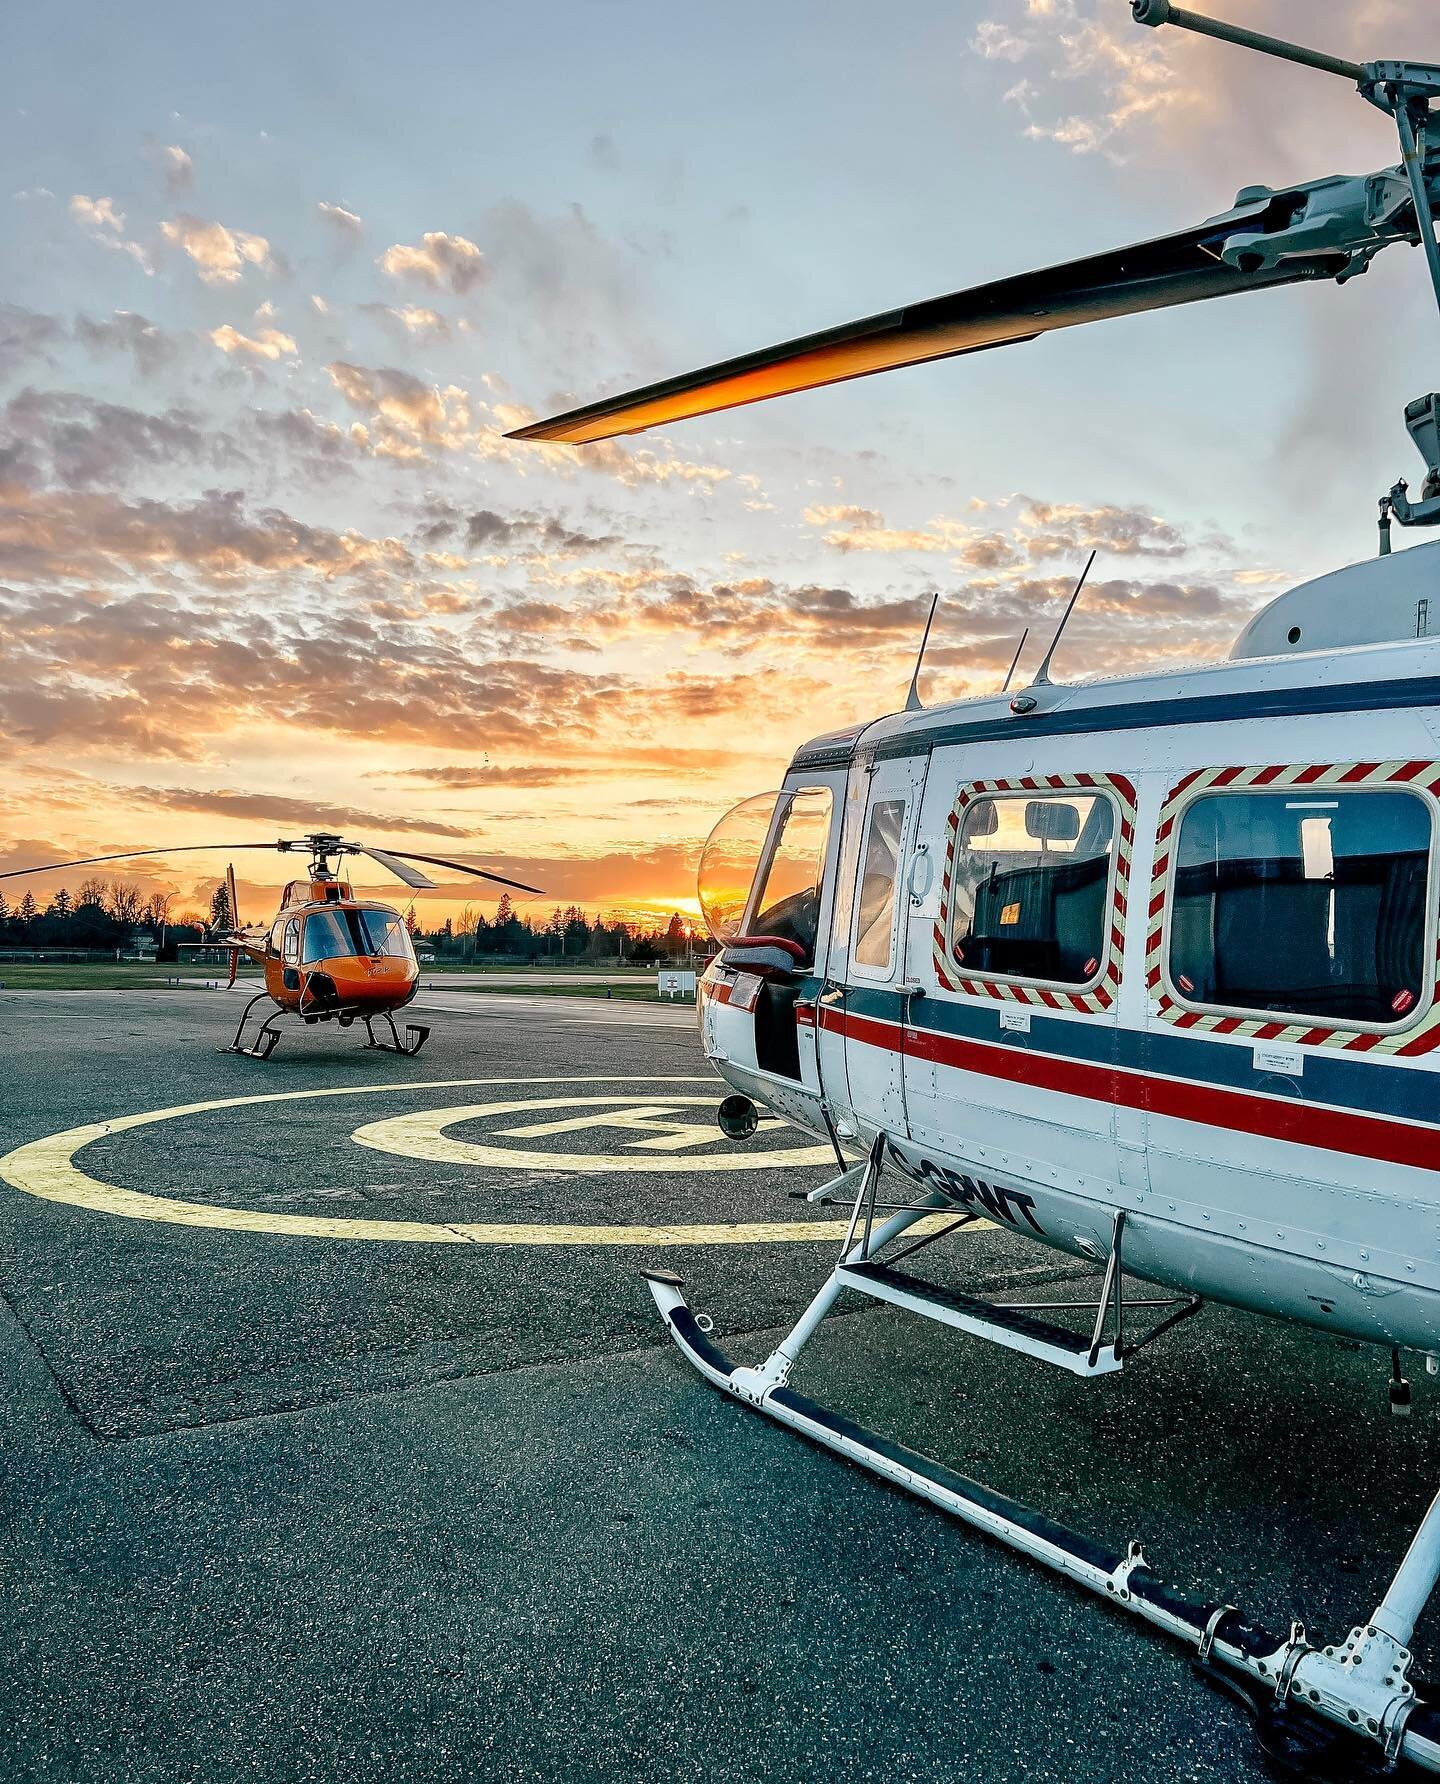 A beautiful evening at Langley Regional Airport (the location of TRK Helicopters&rsquo; head office 😄) 

#helicopter #langleytownship #langleytourism #as350 #bellhelicopter 

Photo cred 📸 @lkren86